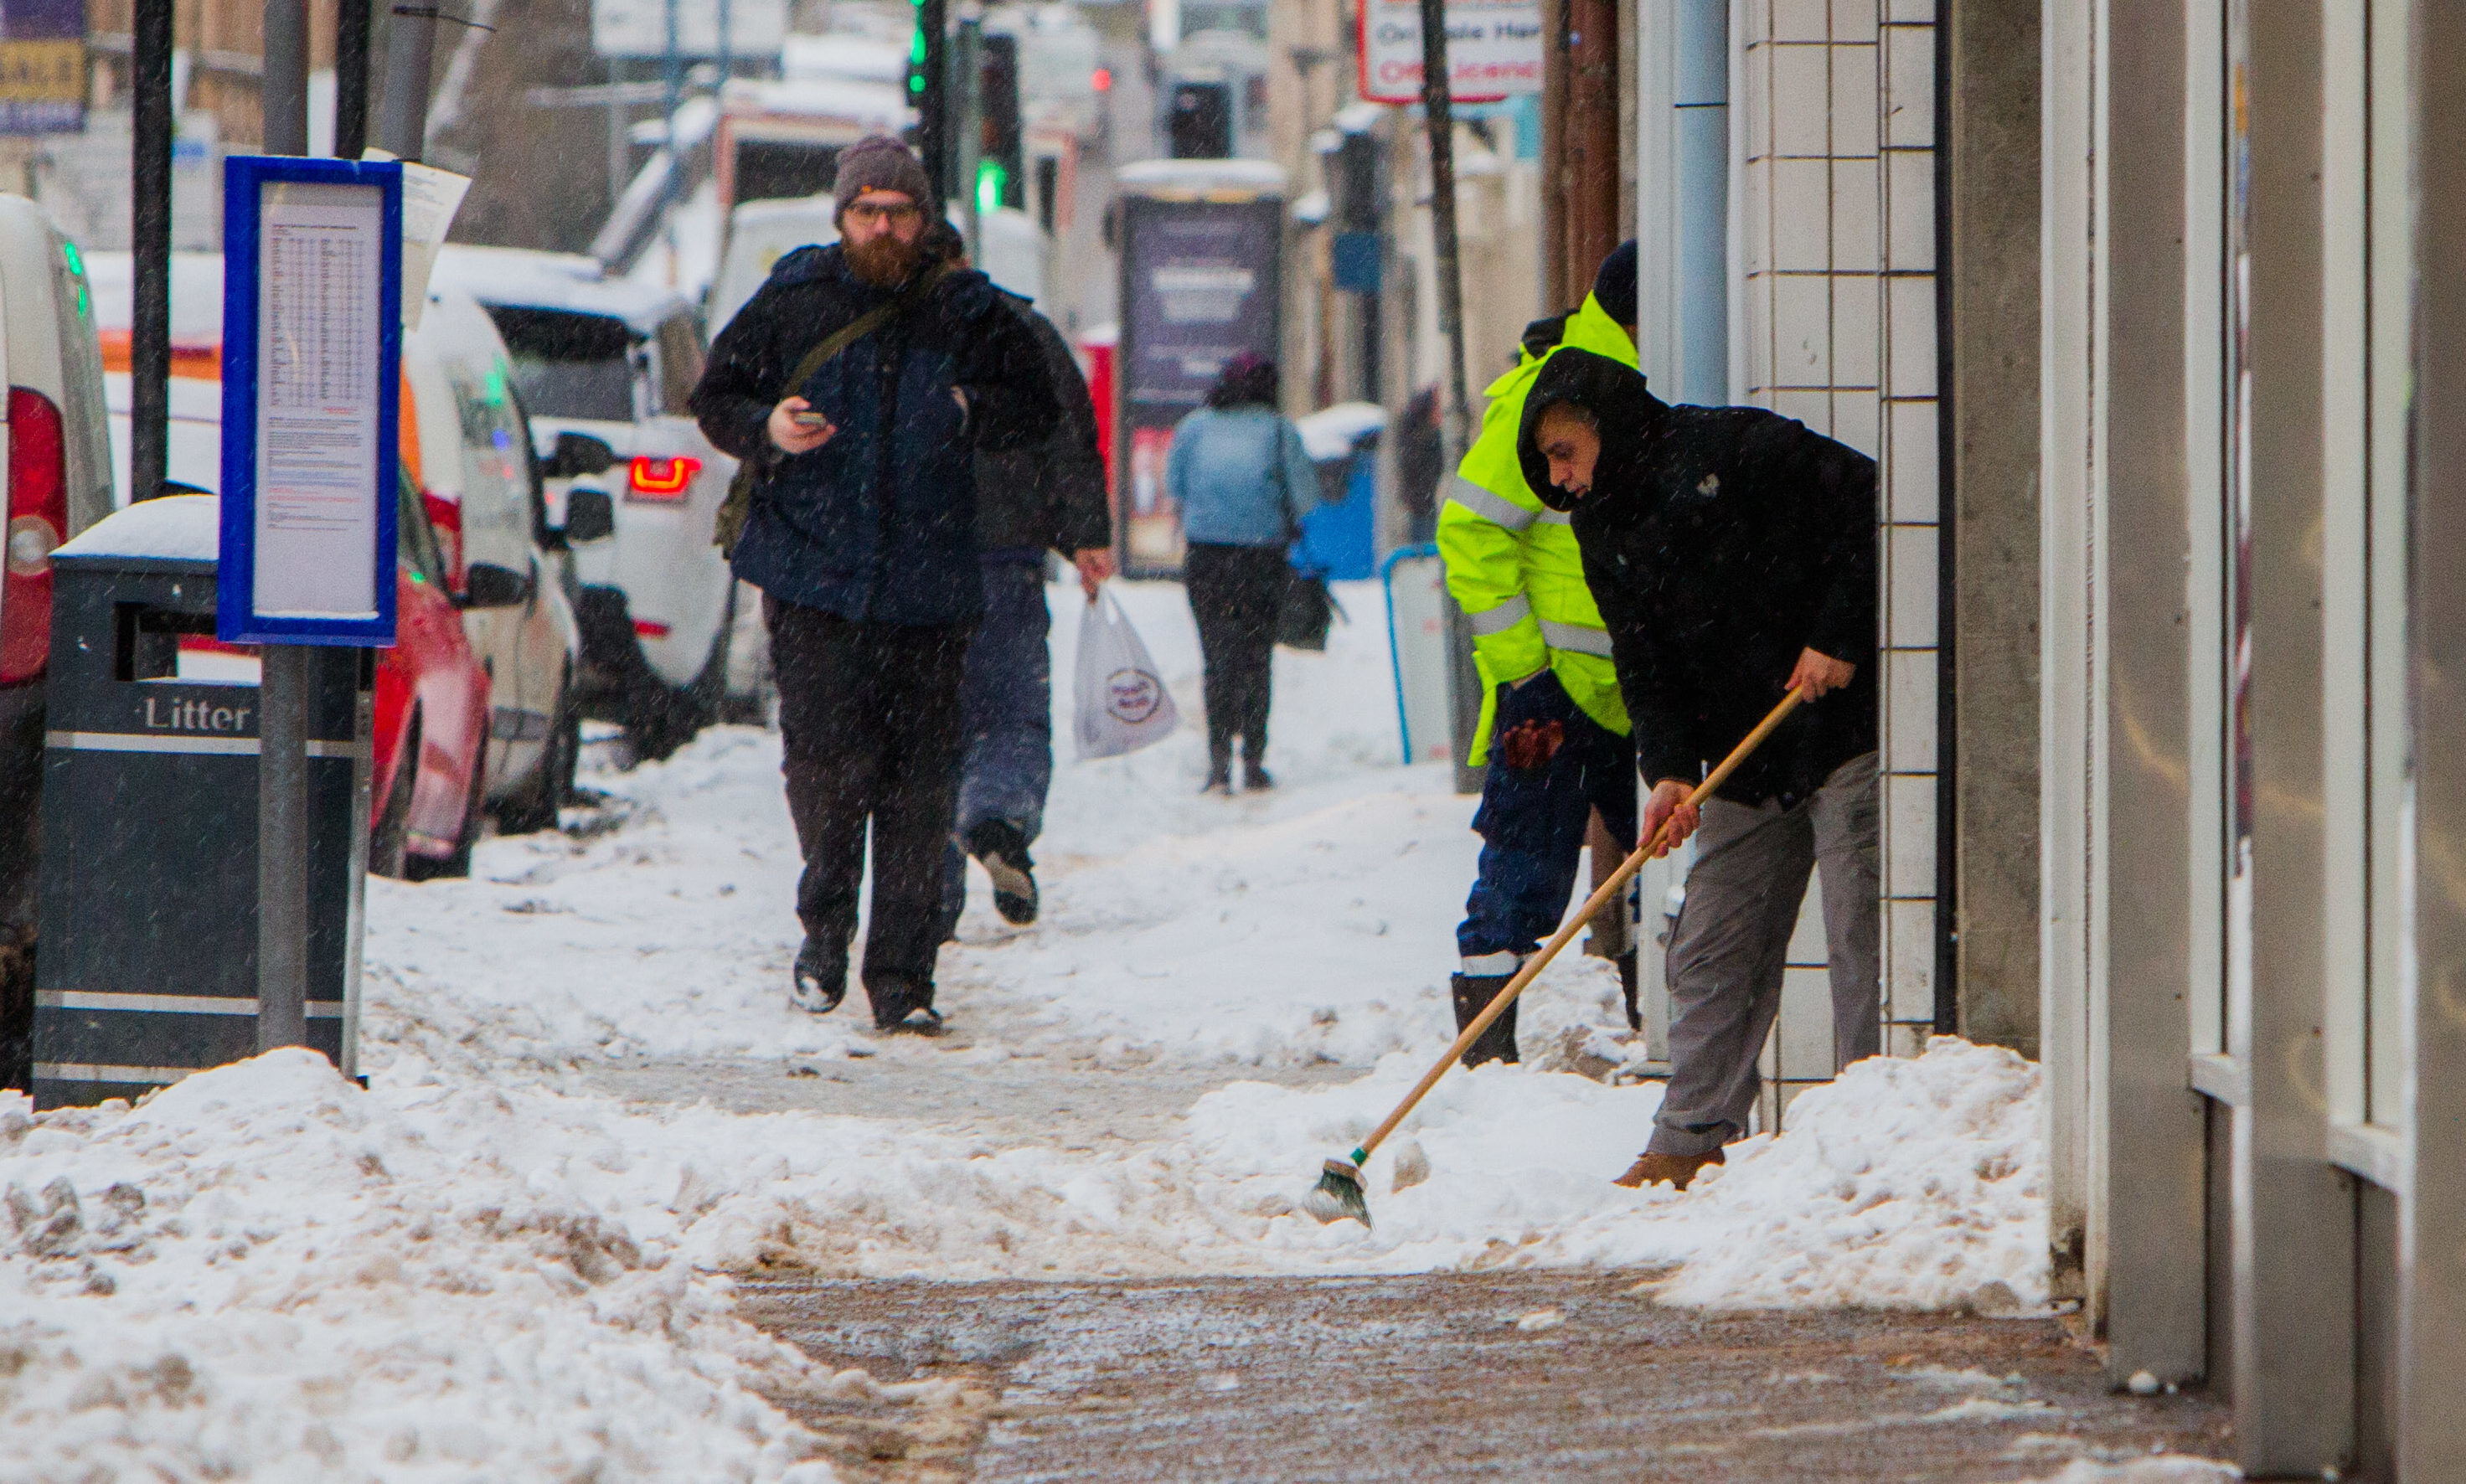 Pavements in South Street, Perth, being cleared of snow during the Beast from the East weather blast.